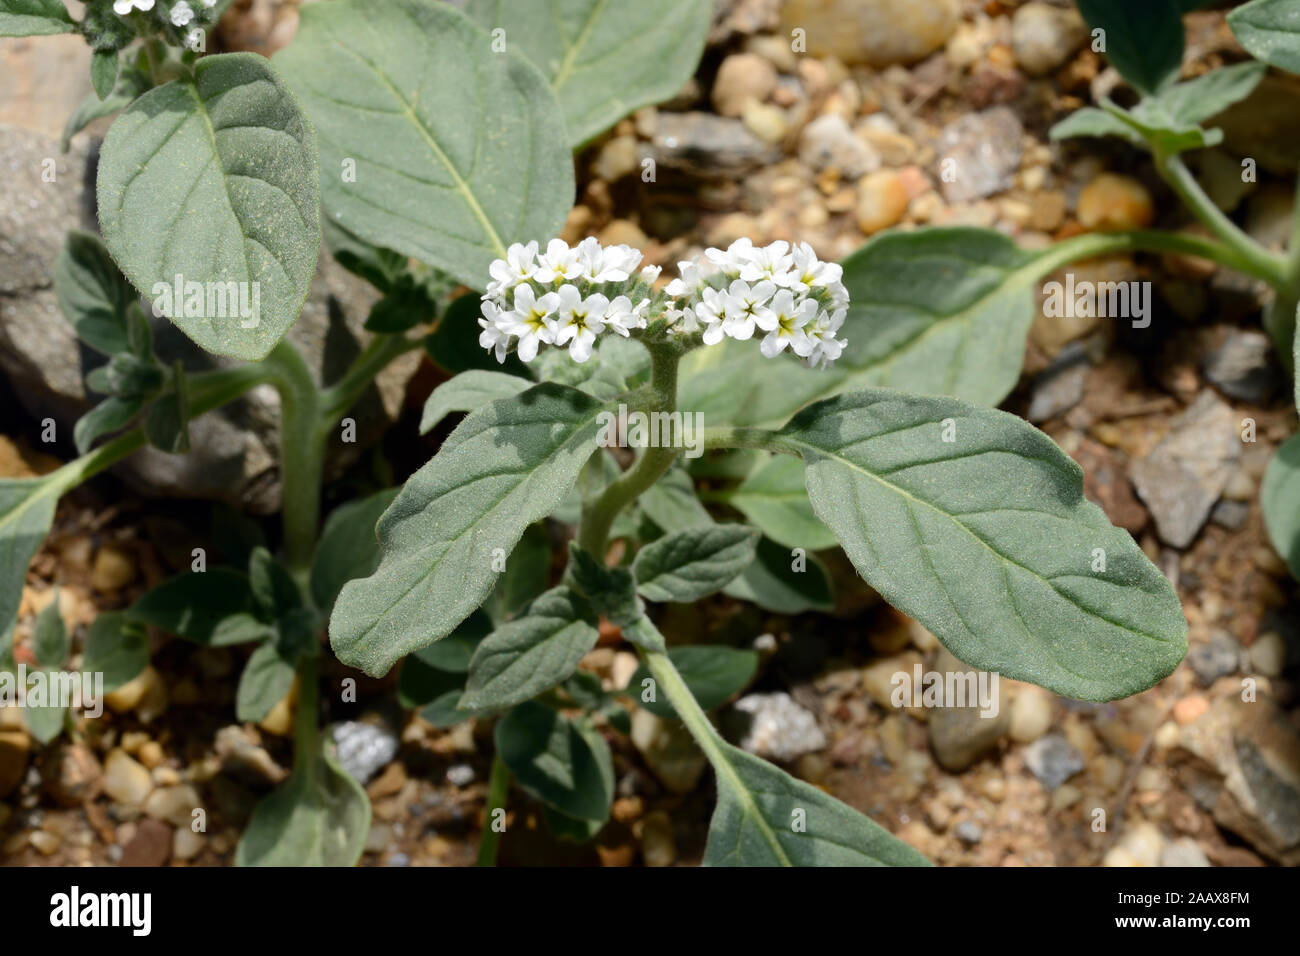 Heliotropium europaeum (European heliotrope) is native to Europe, Asia, and North Africa and has flowers that are said to track the sun Stock Photo